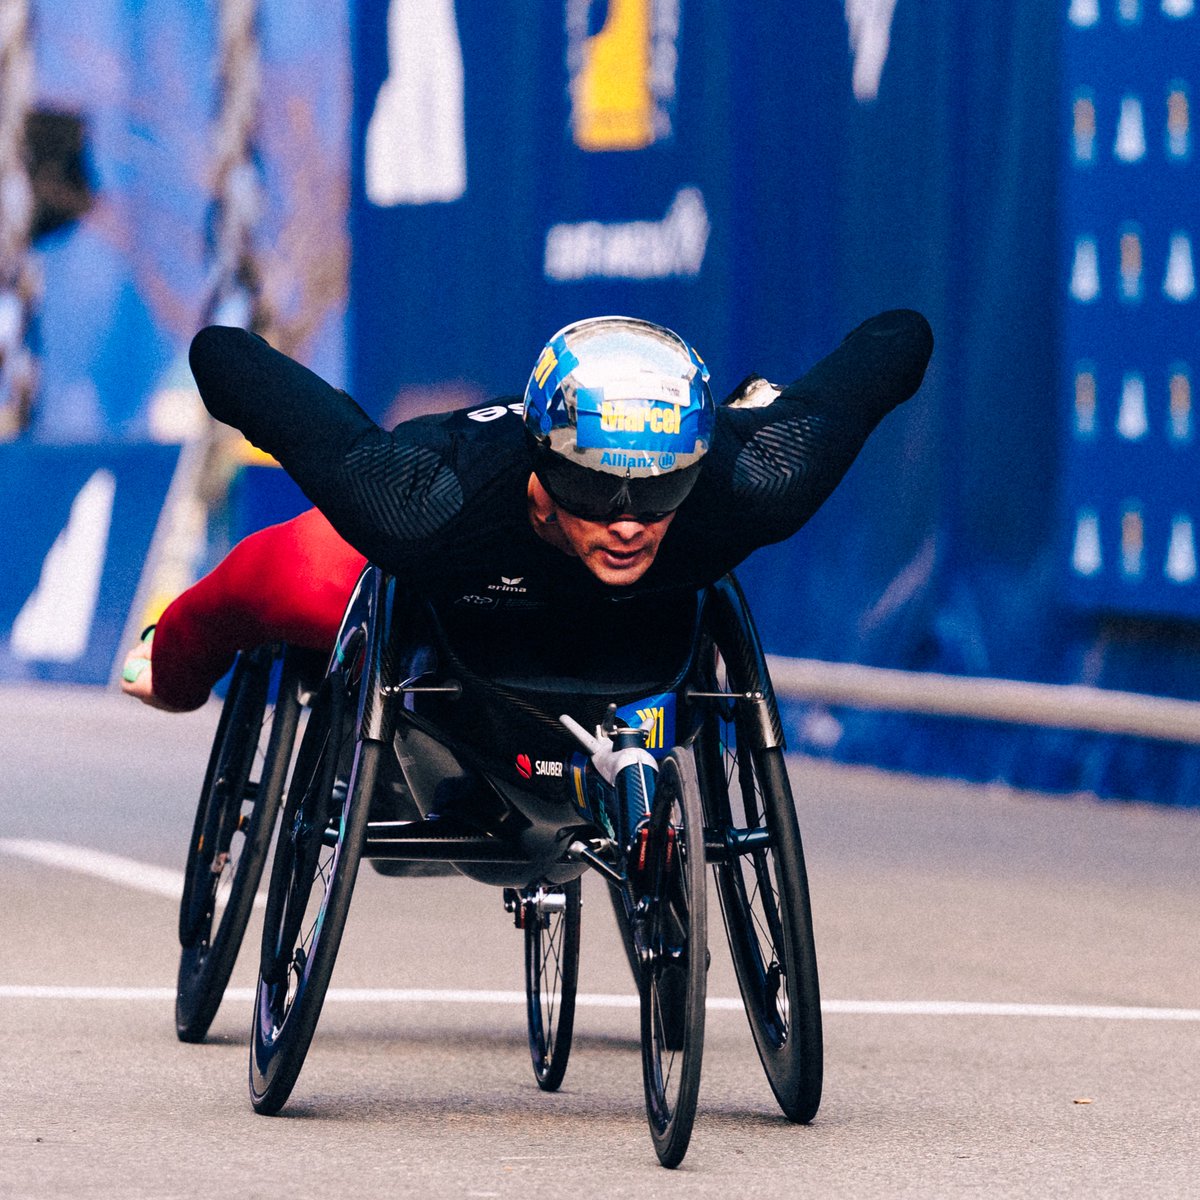 An ominous sign for Monday's race? Marcel Hug looked as sharp as ever, powering to victory in the Boston 5K Wheelchair race, ahead of David Weir, in a tight finish. Eden Rainbow-Cooper claimed the top spot in the women's division, finishing 16 seconds clear of Patricia Eachus.